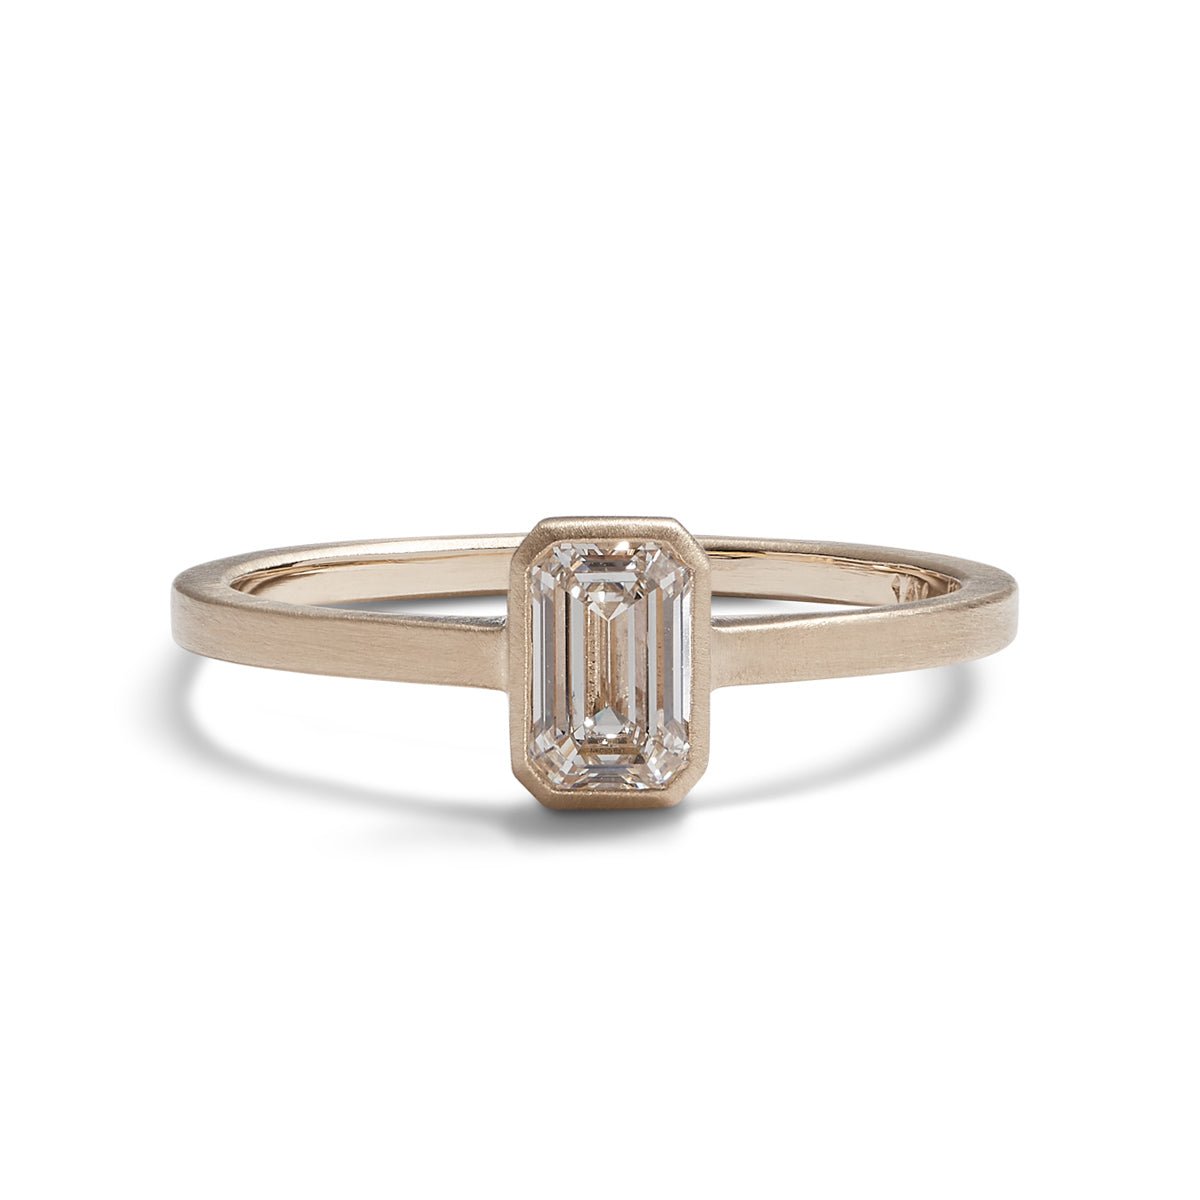 Emerald cut lab-grown diamond Honos ring (0.5 carat). Set in 14K recycled gold and made in Portland, Oregon.